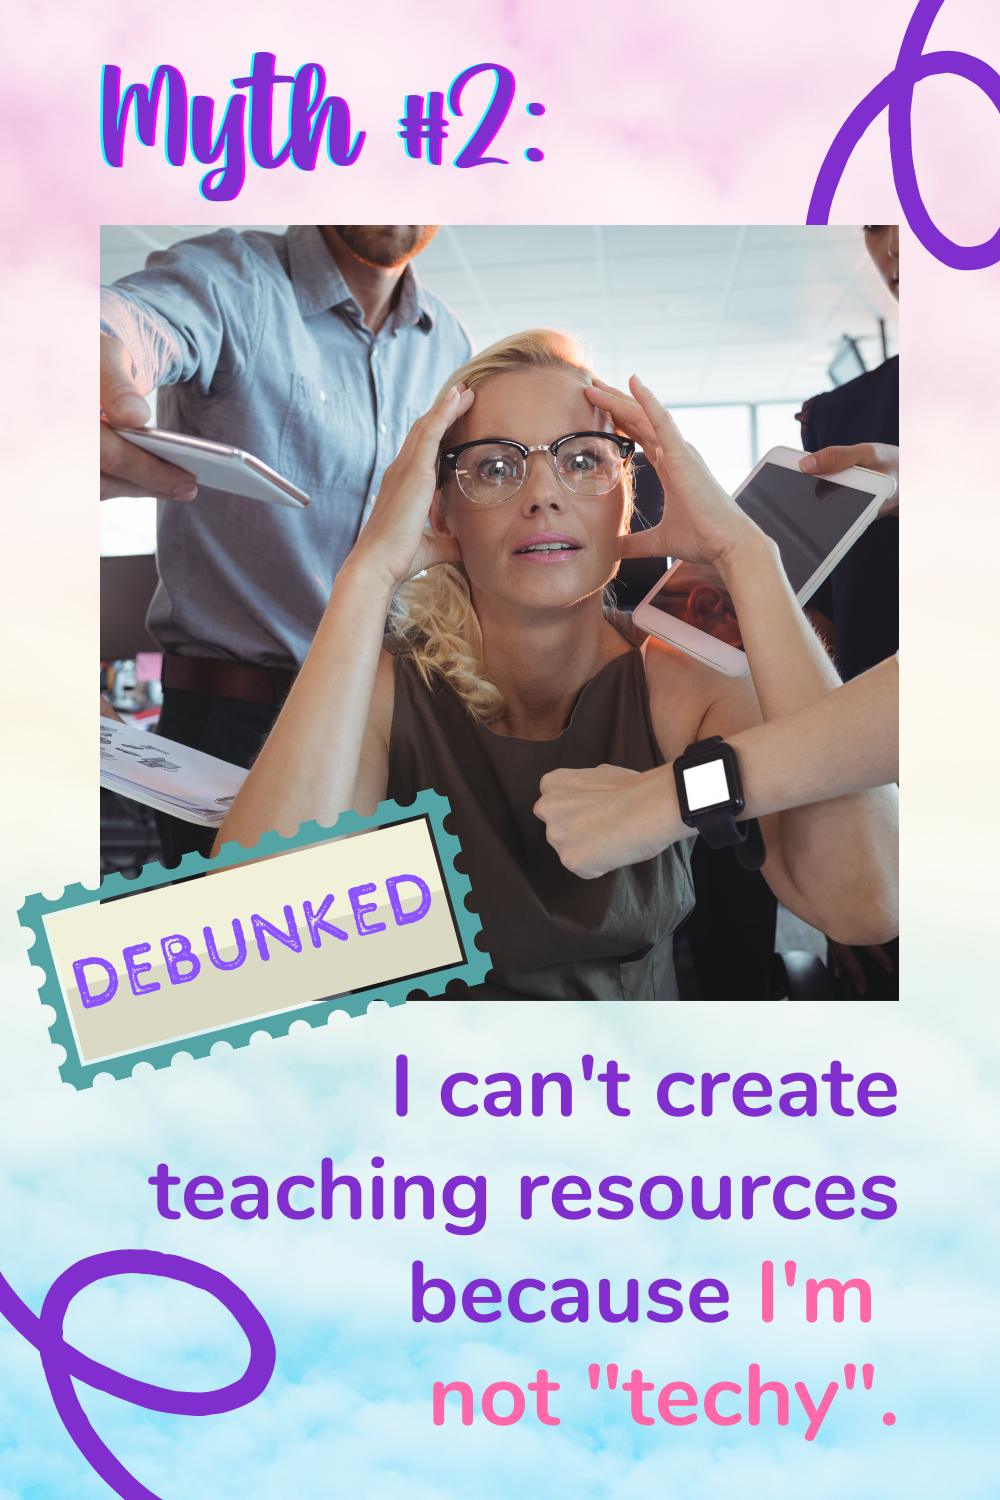 creating-teaching-resources-is-too-technical
